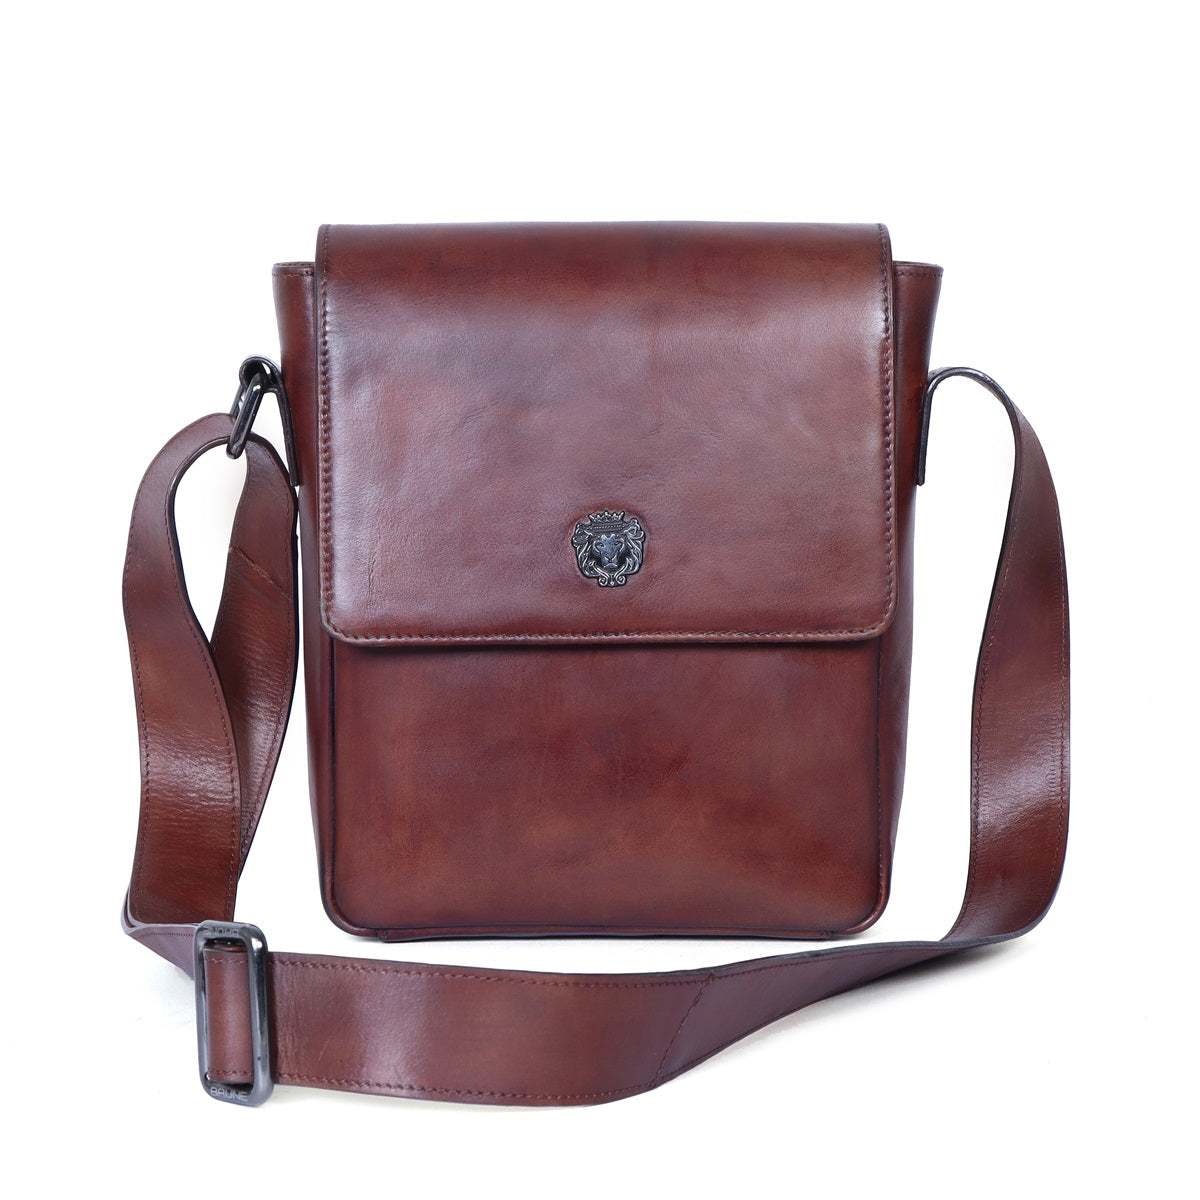 Flap-over Cross-Body Bag in Genuine Brown Leather